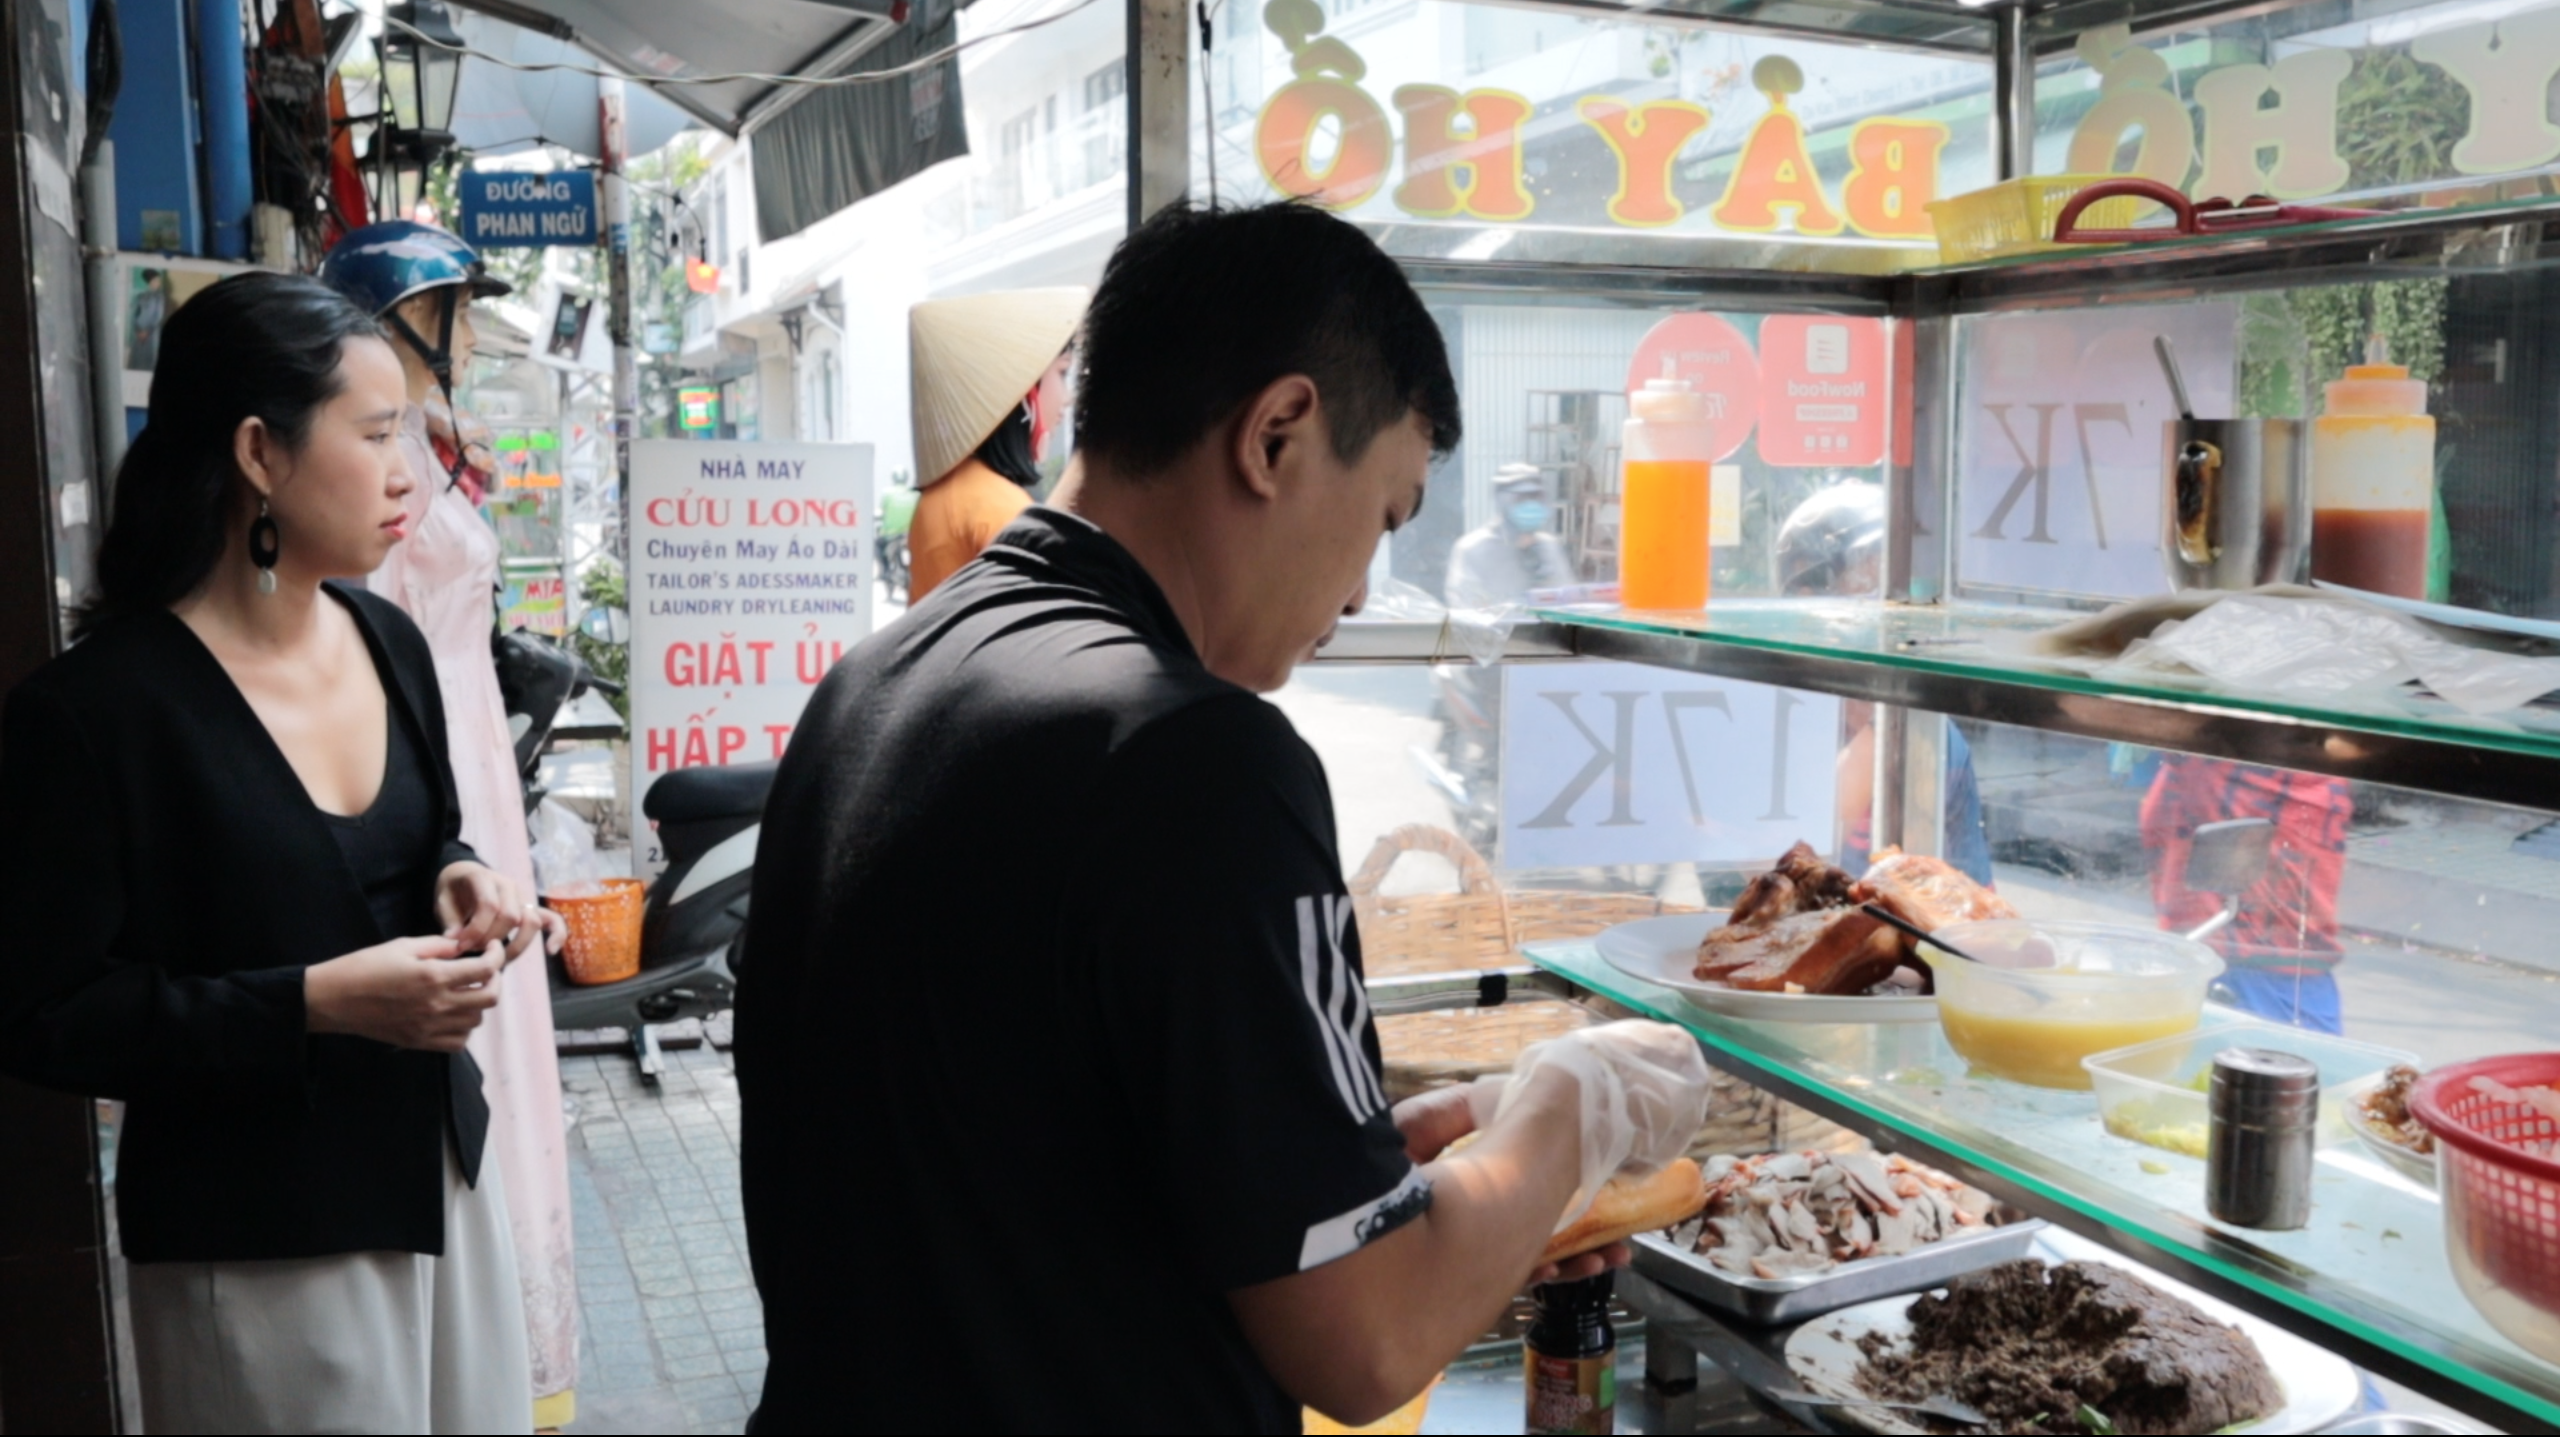 Ho Quoc Dung, the current owner of banh mi Bay Ho cart, prepares banh mi for customers. Photo: Linh To / Tuoi Tre